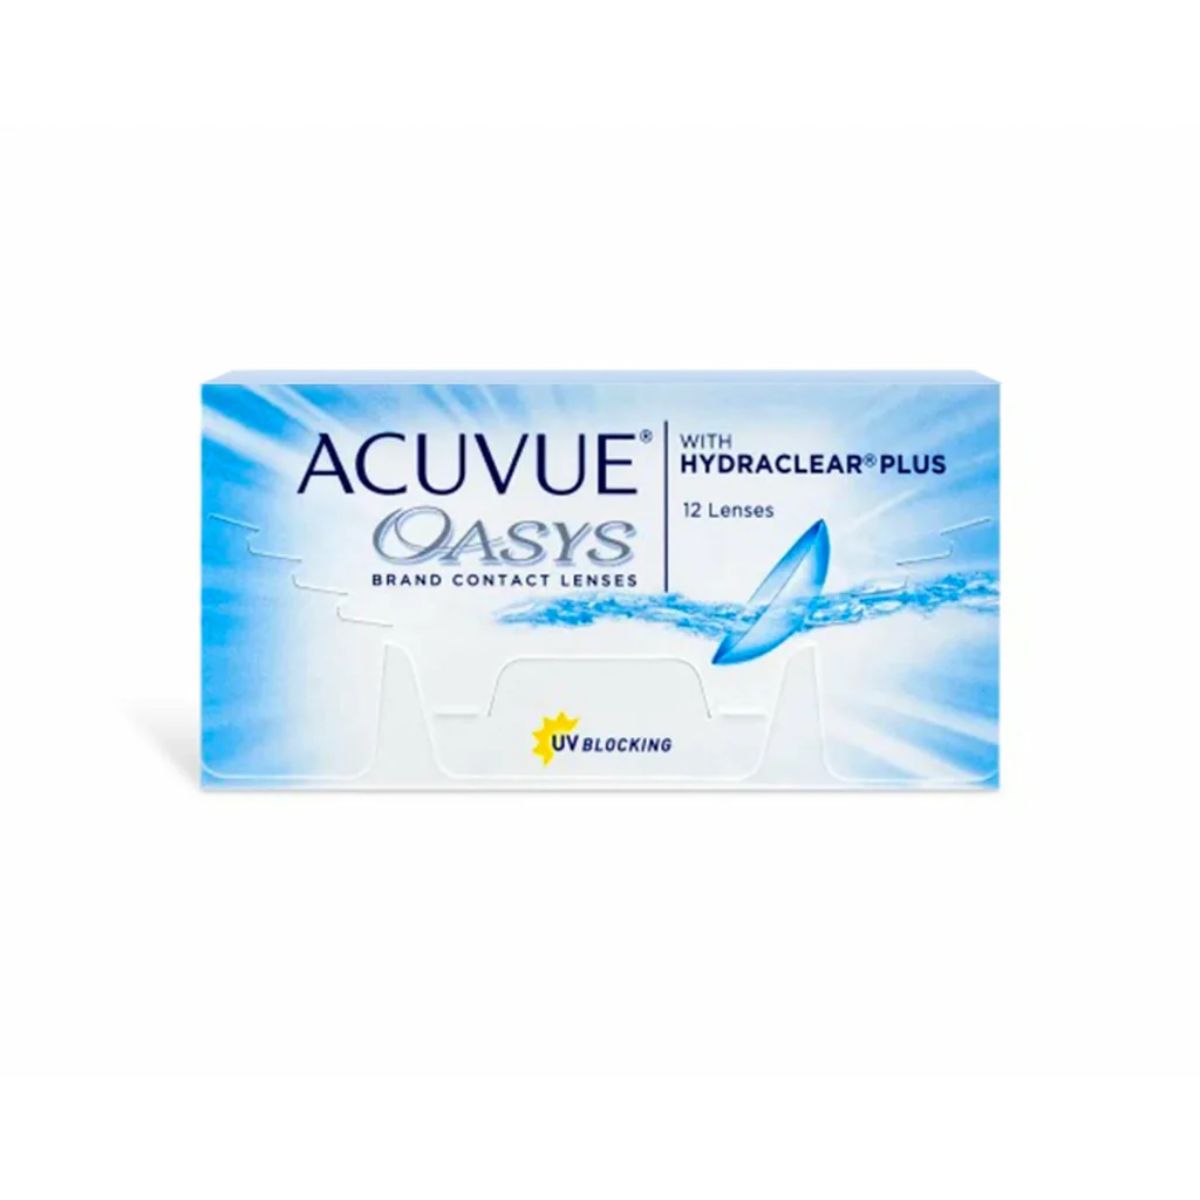 "Buy Acuvue Oasys With Hydraclear Plus Contact Lenses - 12 Pack Optorium"